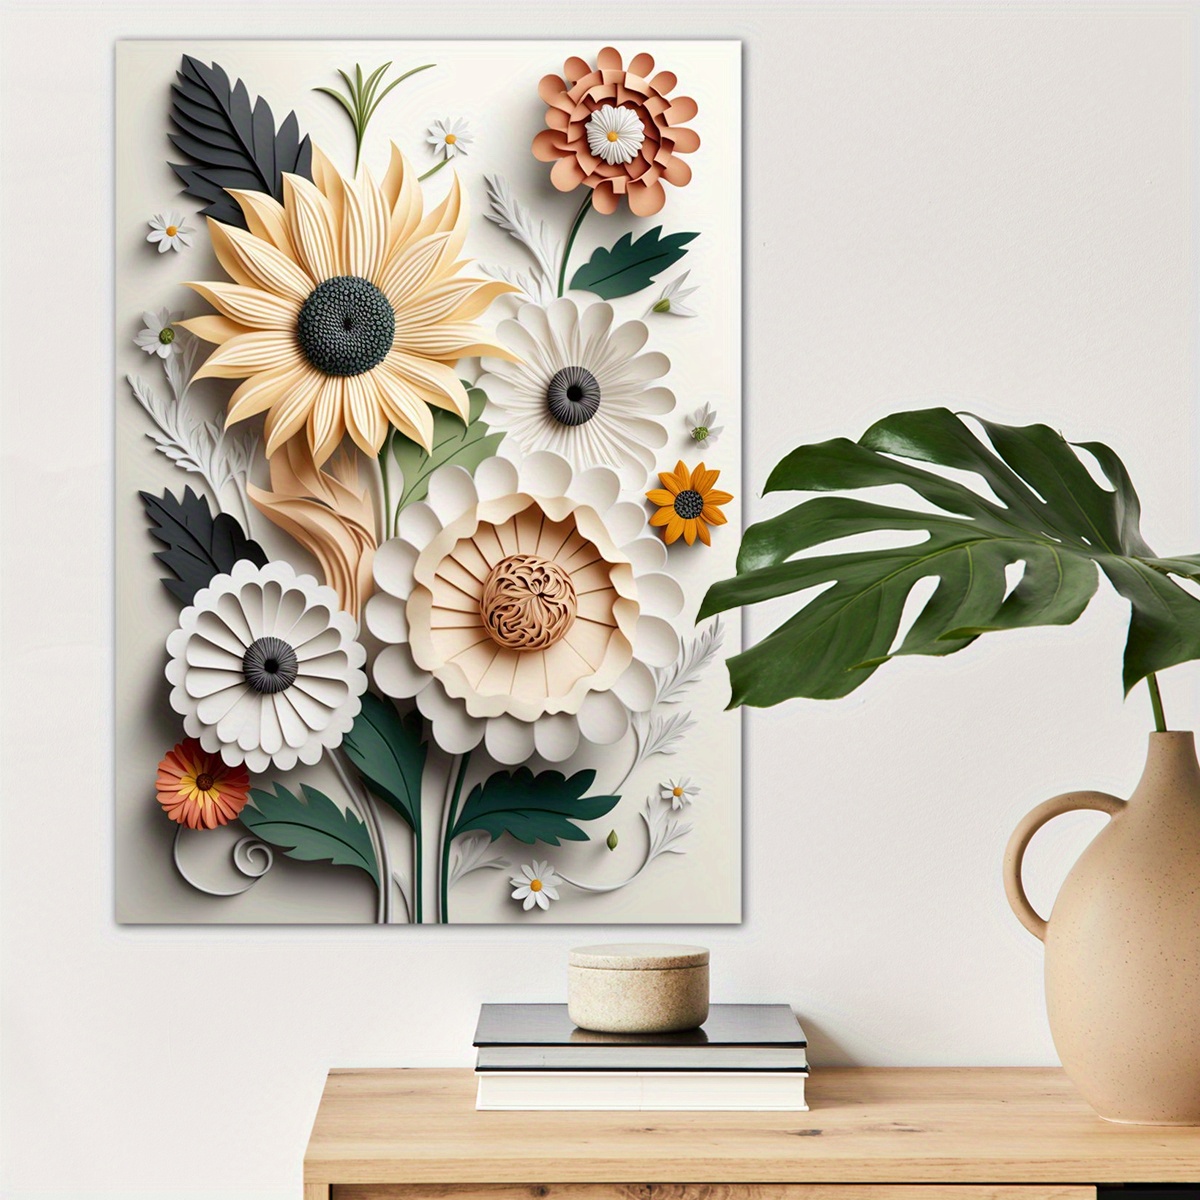 

1pc Colorful Flowers Canvas Wall Art For Home Decor, Modern Poster Wall Decor, 3d Effect Canvas Prints For Living Room Bedroom Kitchen Office Cafe Decor, Perfect Gift And Decoration